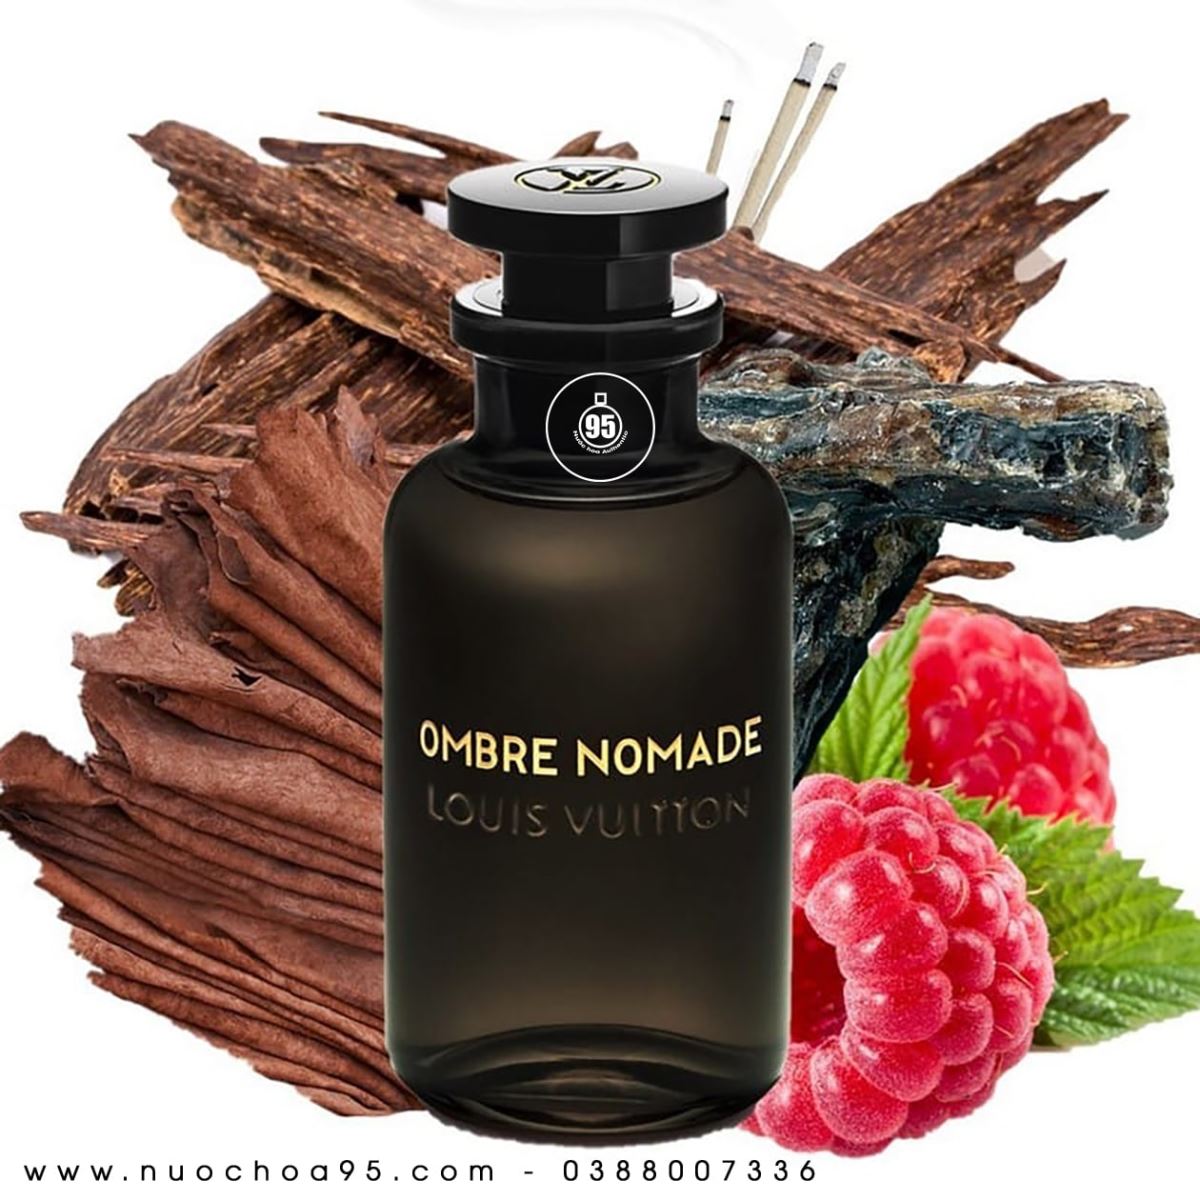 Louis Vuitton  Ombre Nomade  Fragrance Review  YouTube